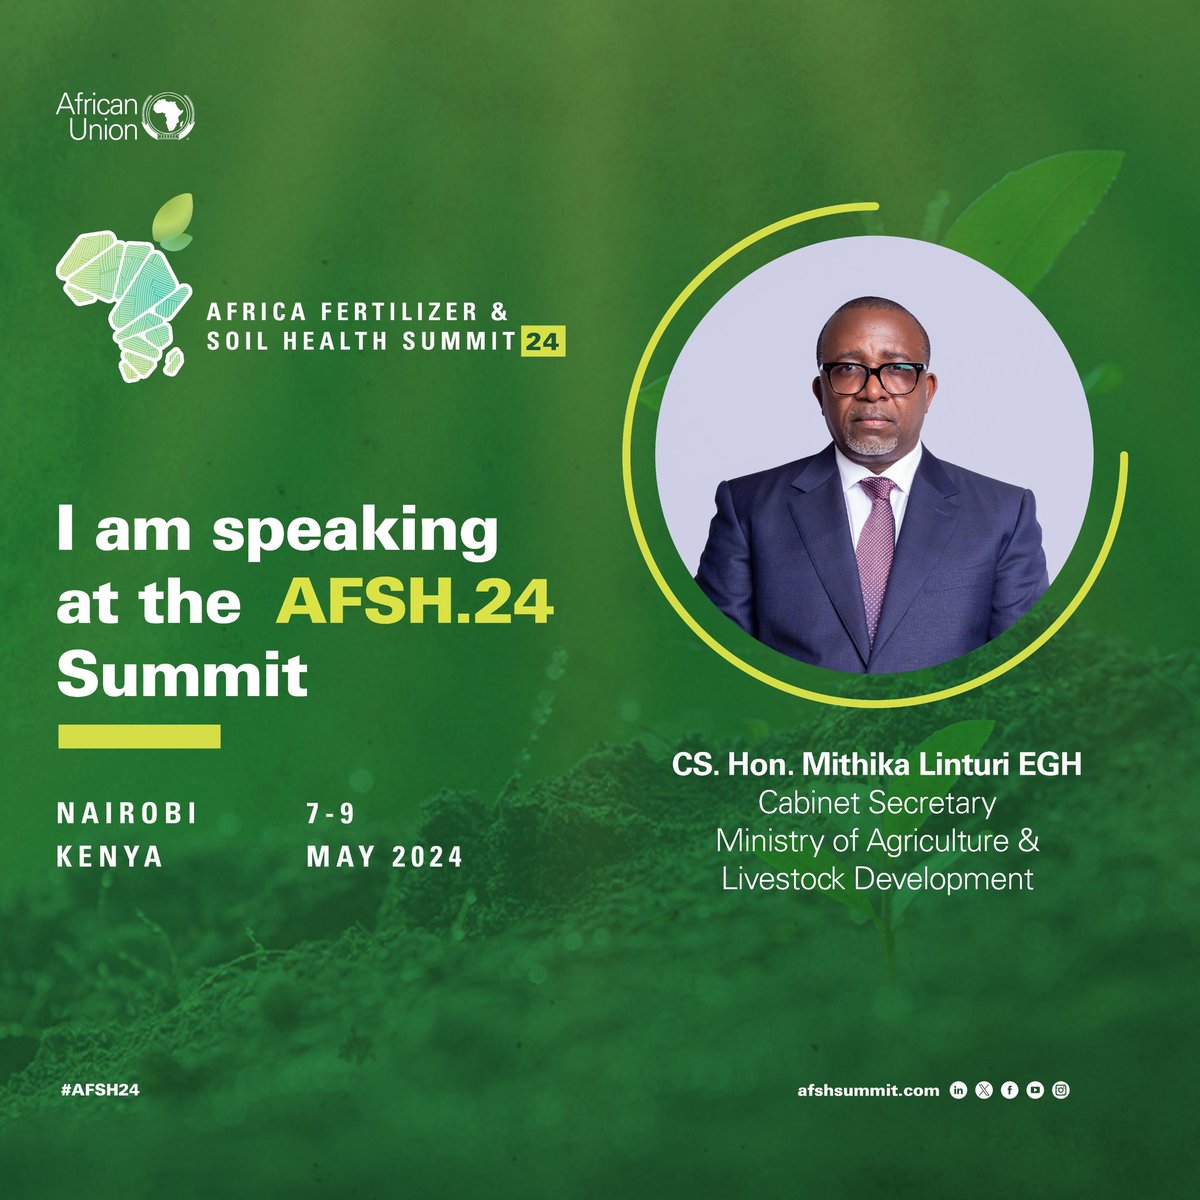 Welcome to the Africa Fertilizer and Soil Health Summit 2024 at KICC, Nairobi. @_AfricanUnion @kilimoKE
#AFSH24
#Agenda2063